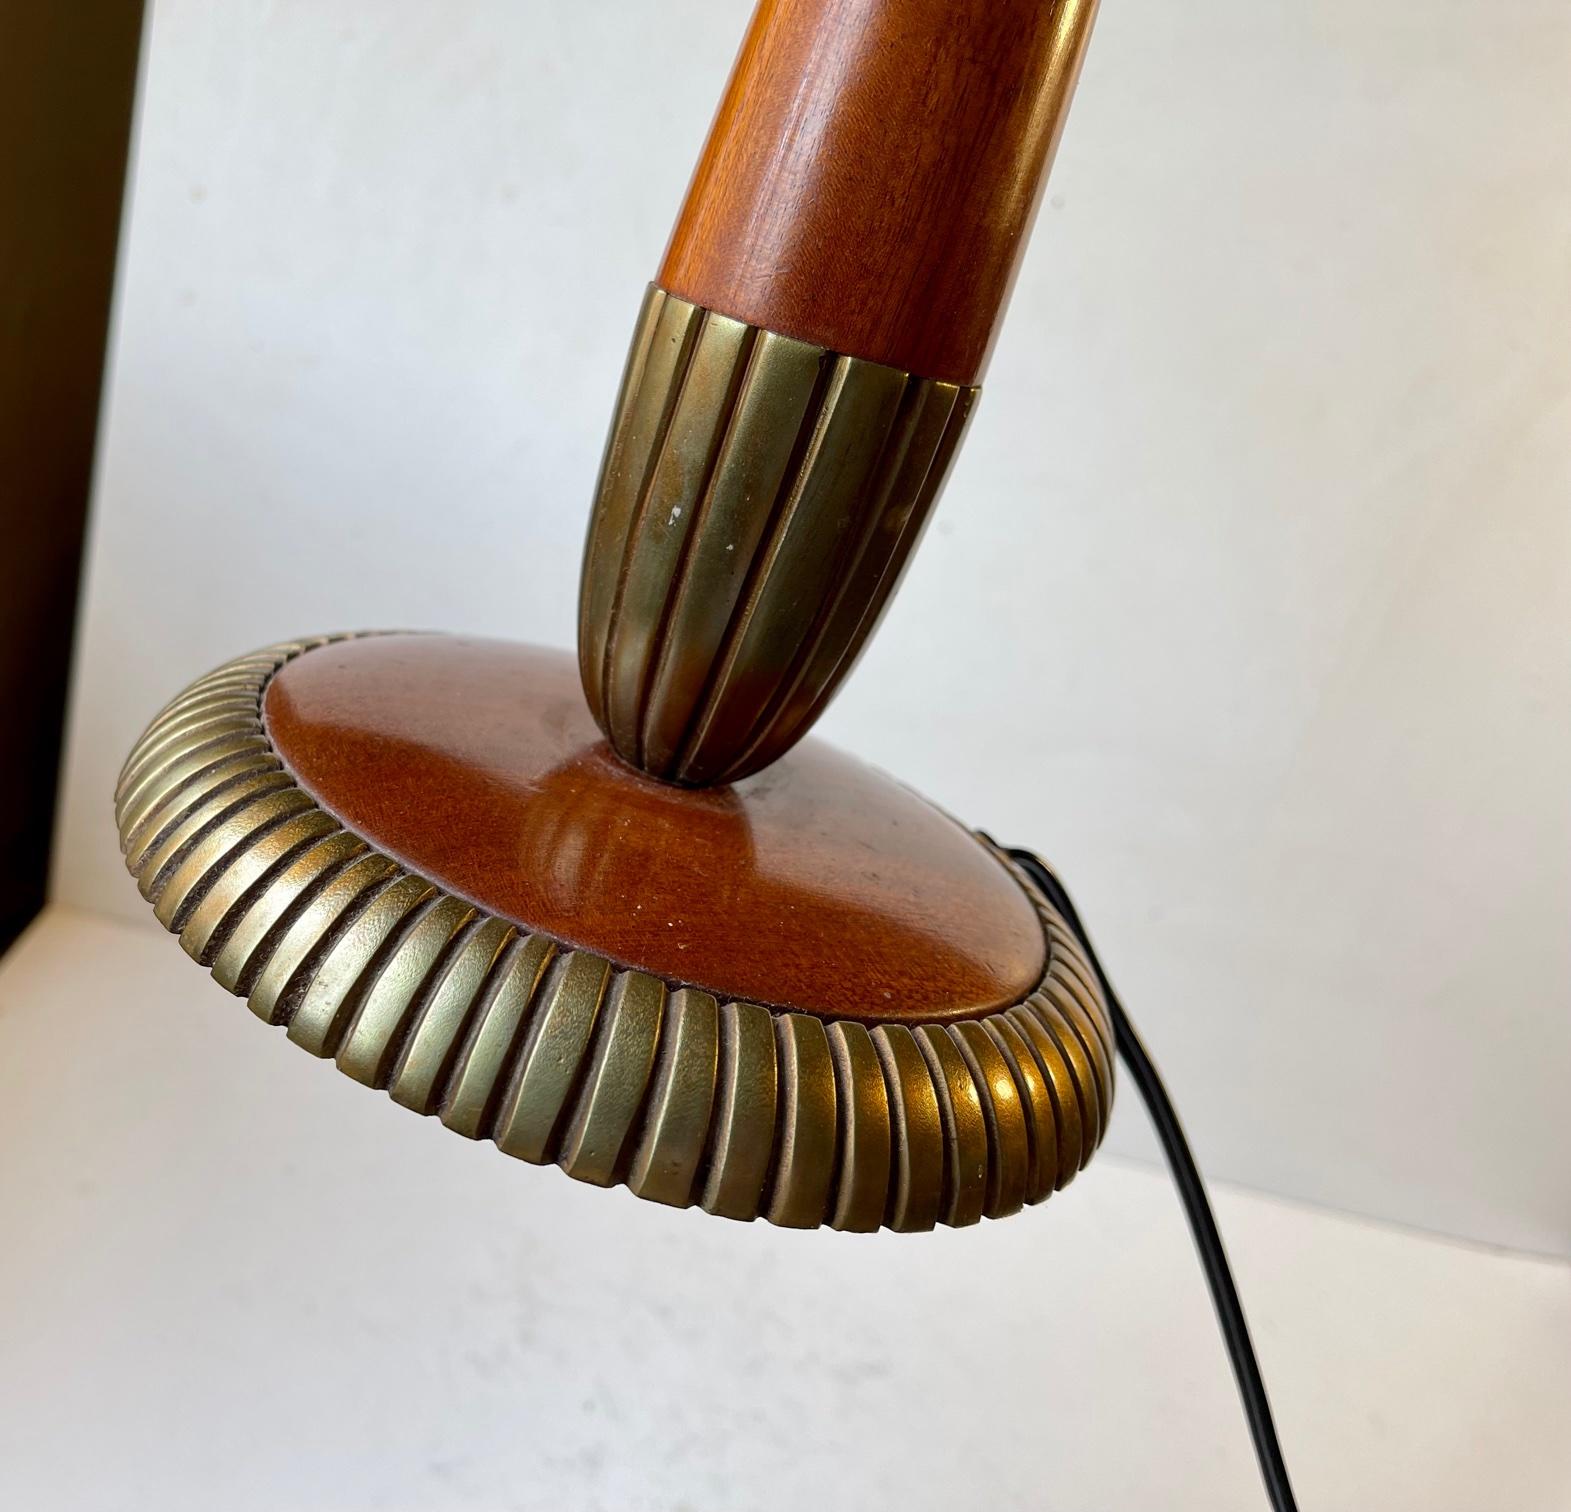 Scandinavian Modern Table Lamp in Walnut and Brass, 1950s For Sale 1